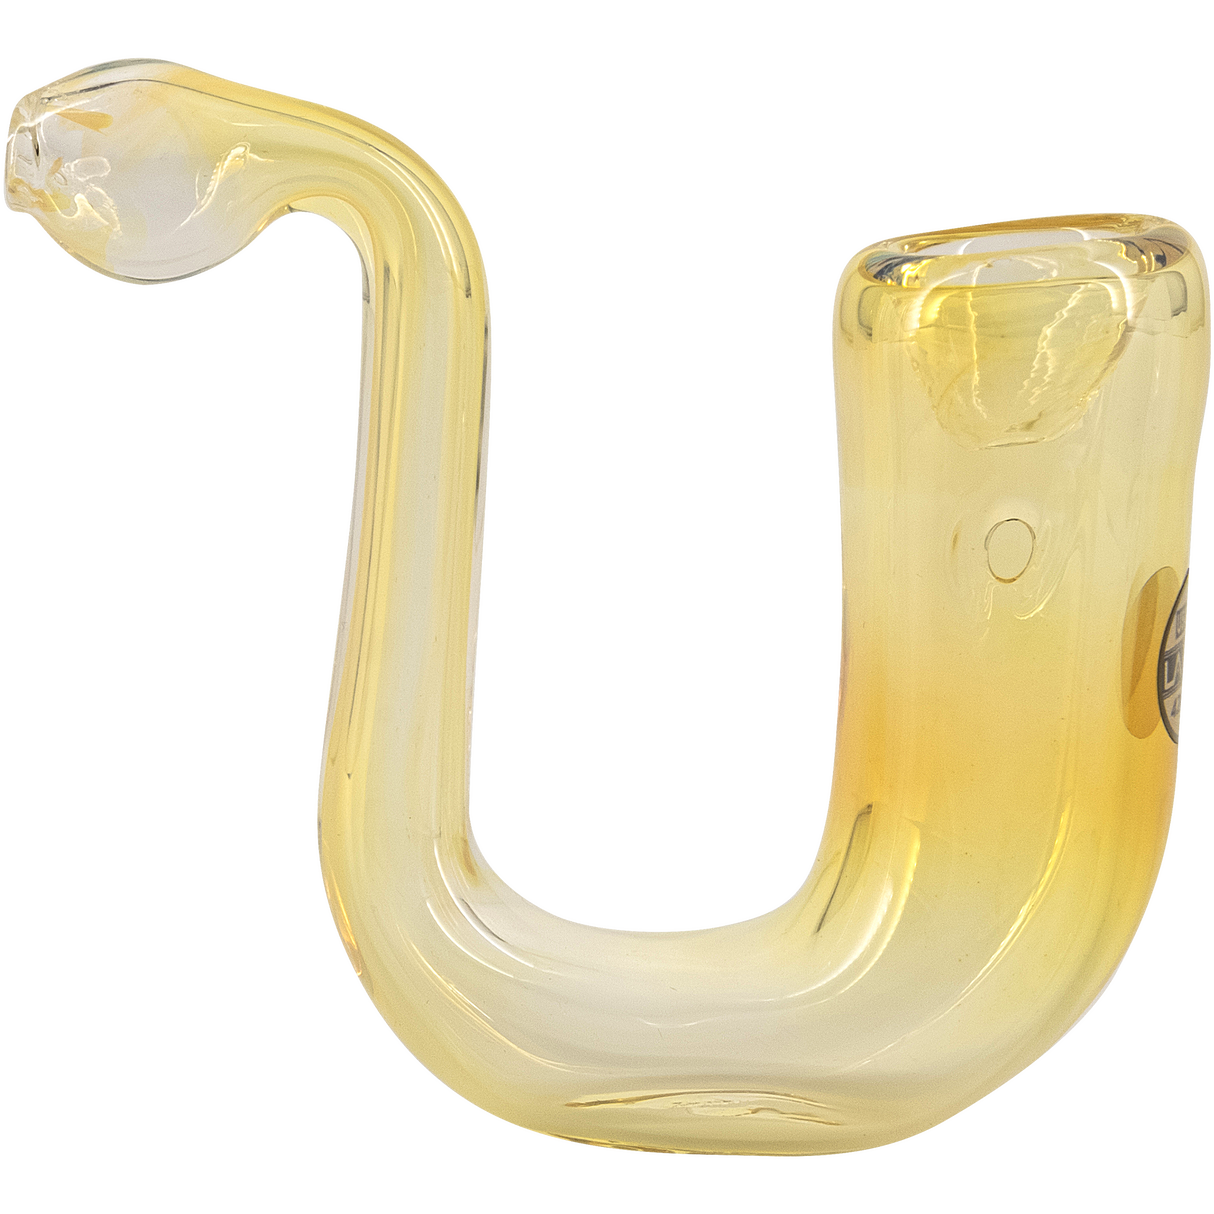 LA Pipes "Calabash" Fumed Glass Sherlock Hand Pipe, Color Changing, Side View